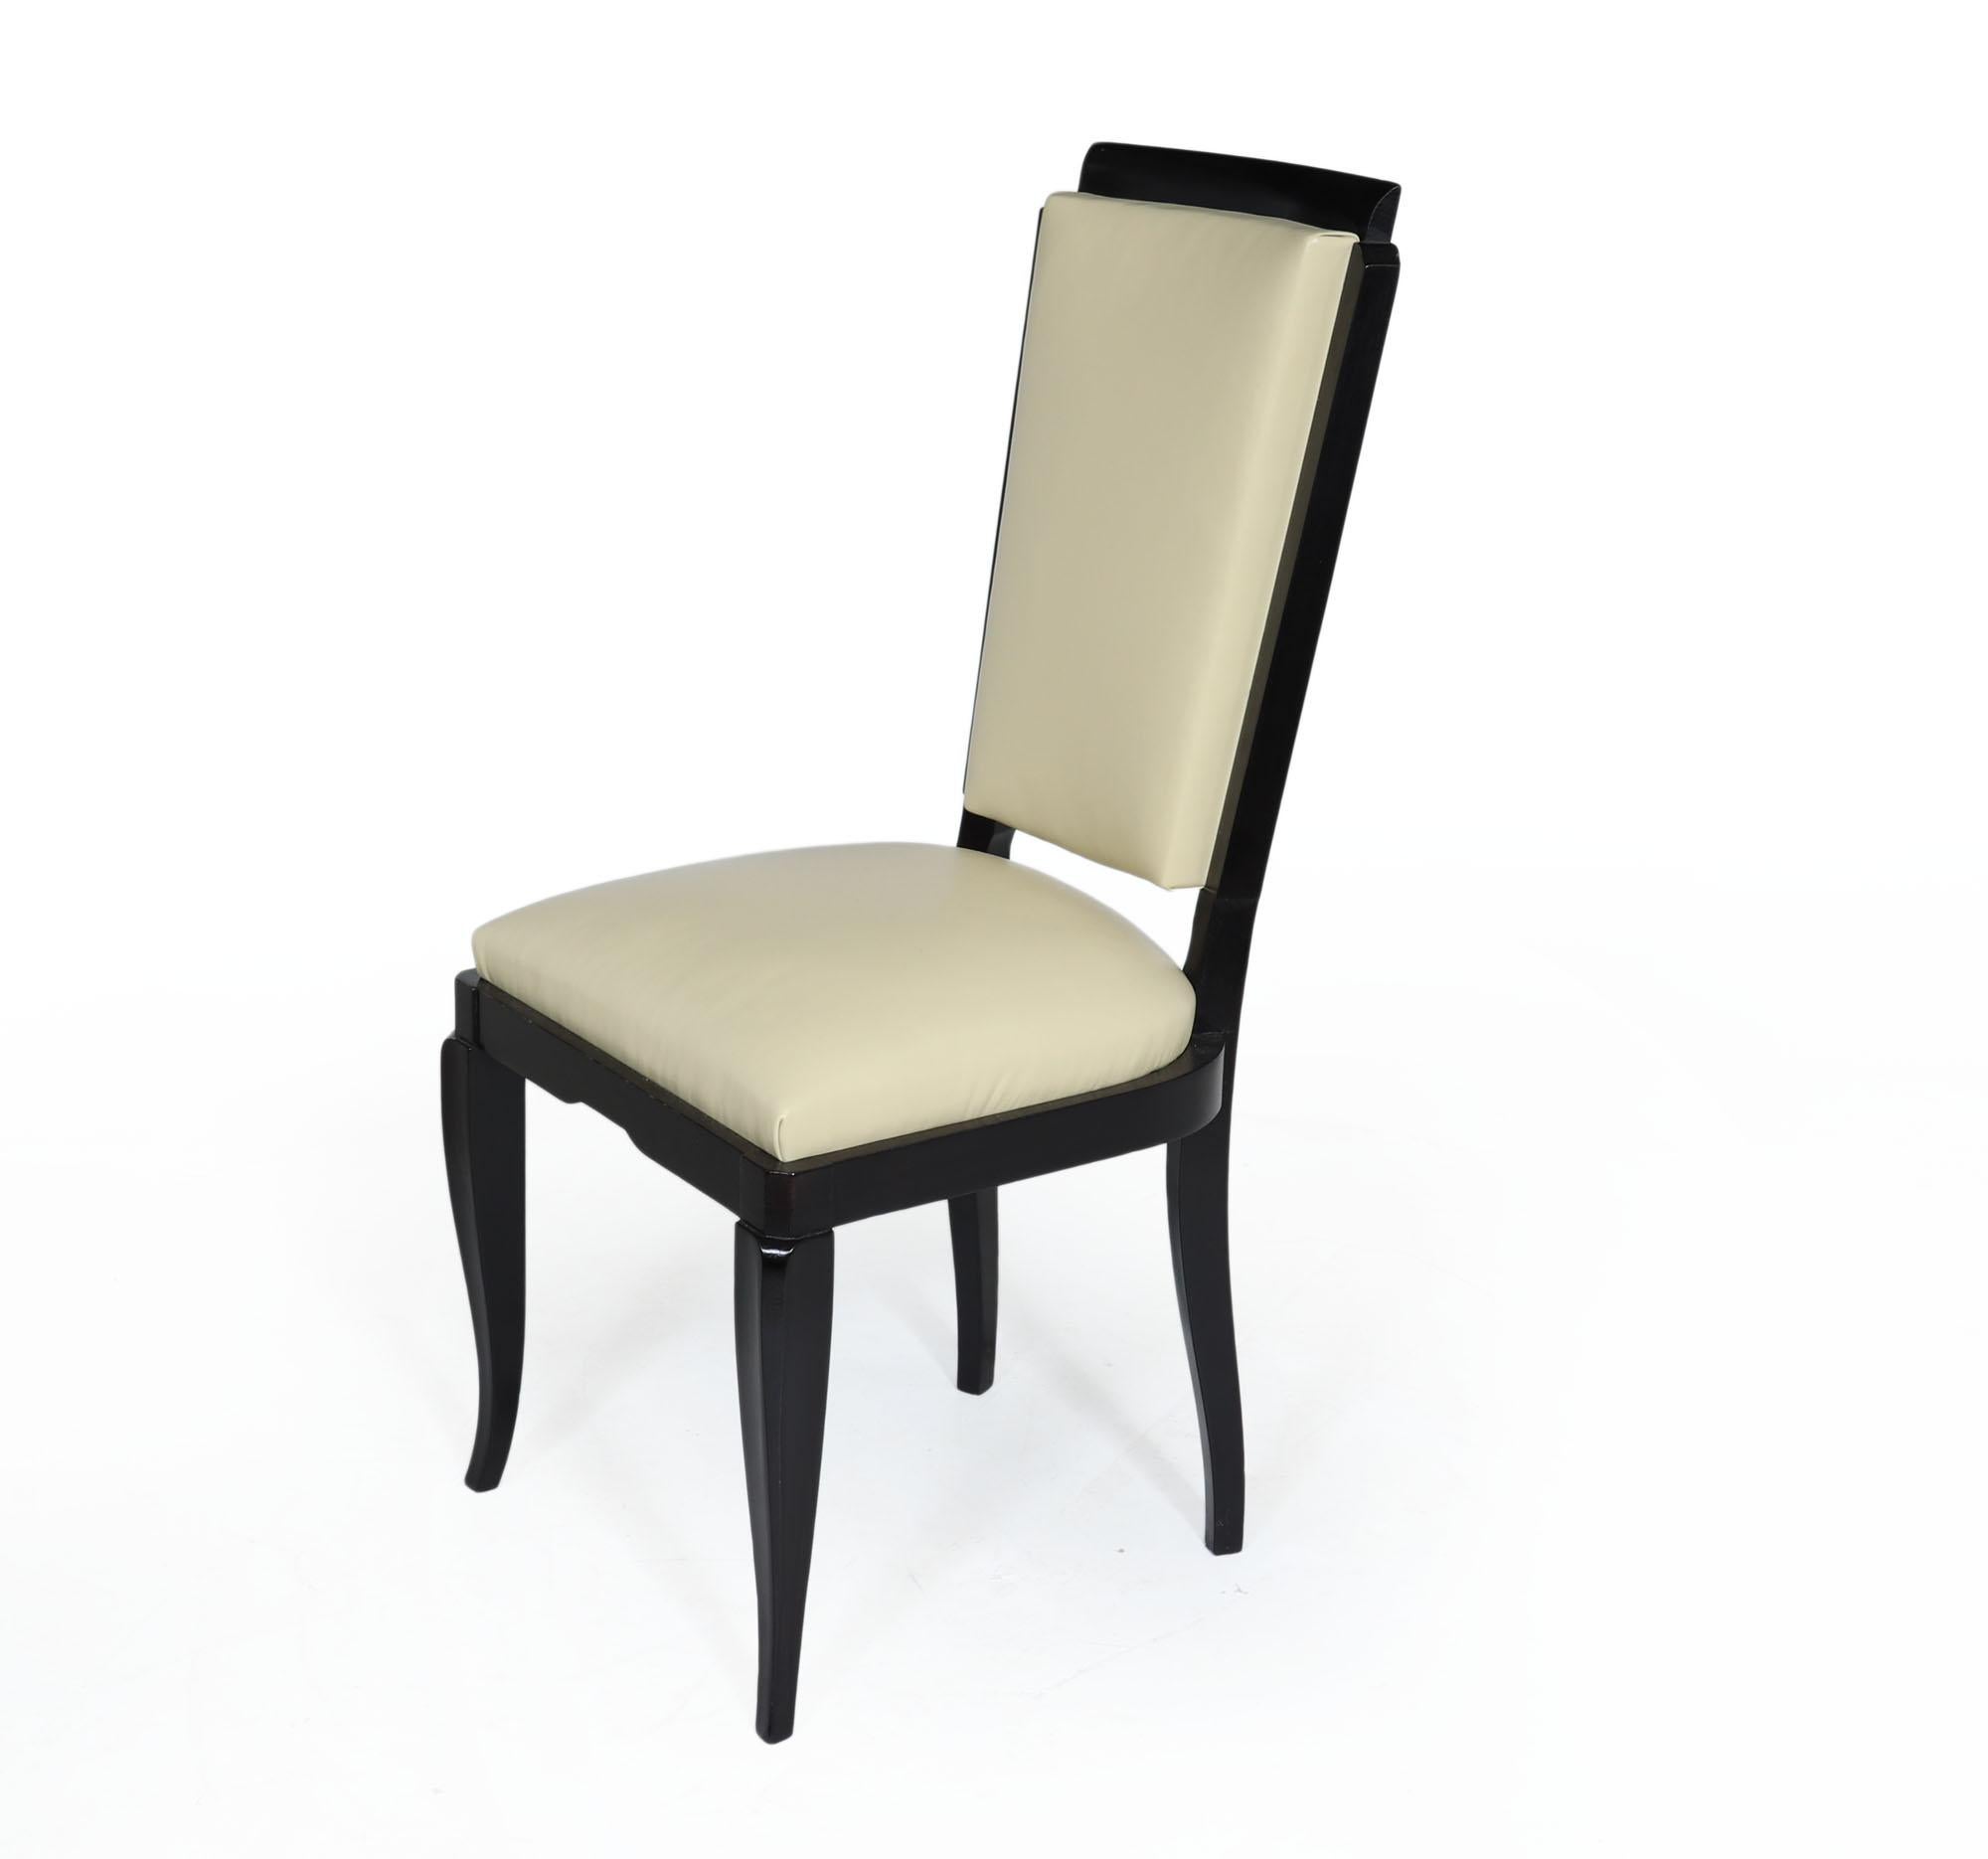 French Art Deco dining chairs
A set of six dining chairs produced in France in the 1920’s, good solid frames with new thick cream leather upholstery with ebonised black piano lacquer frames. The chairs are in excellent condition throughout and have